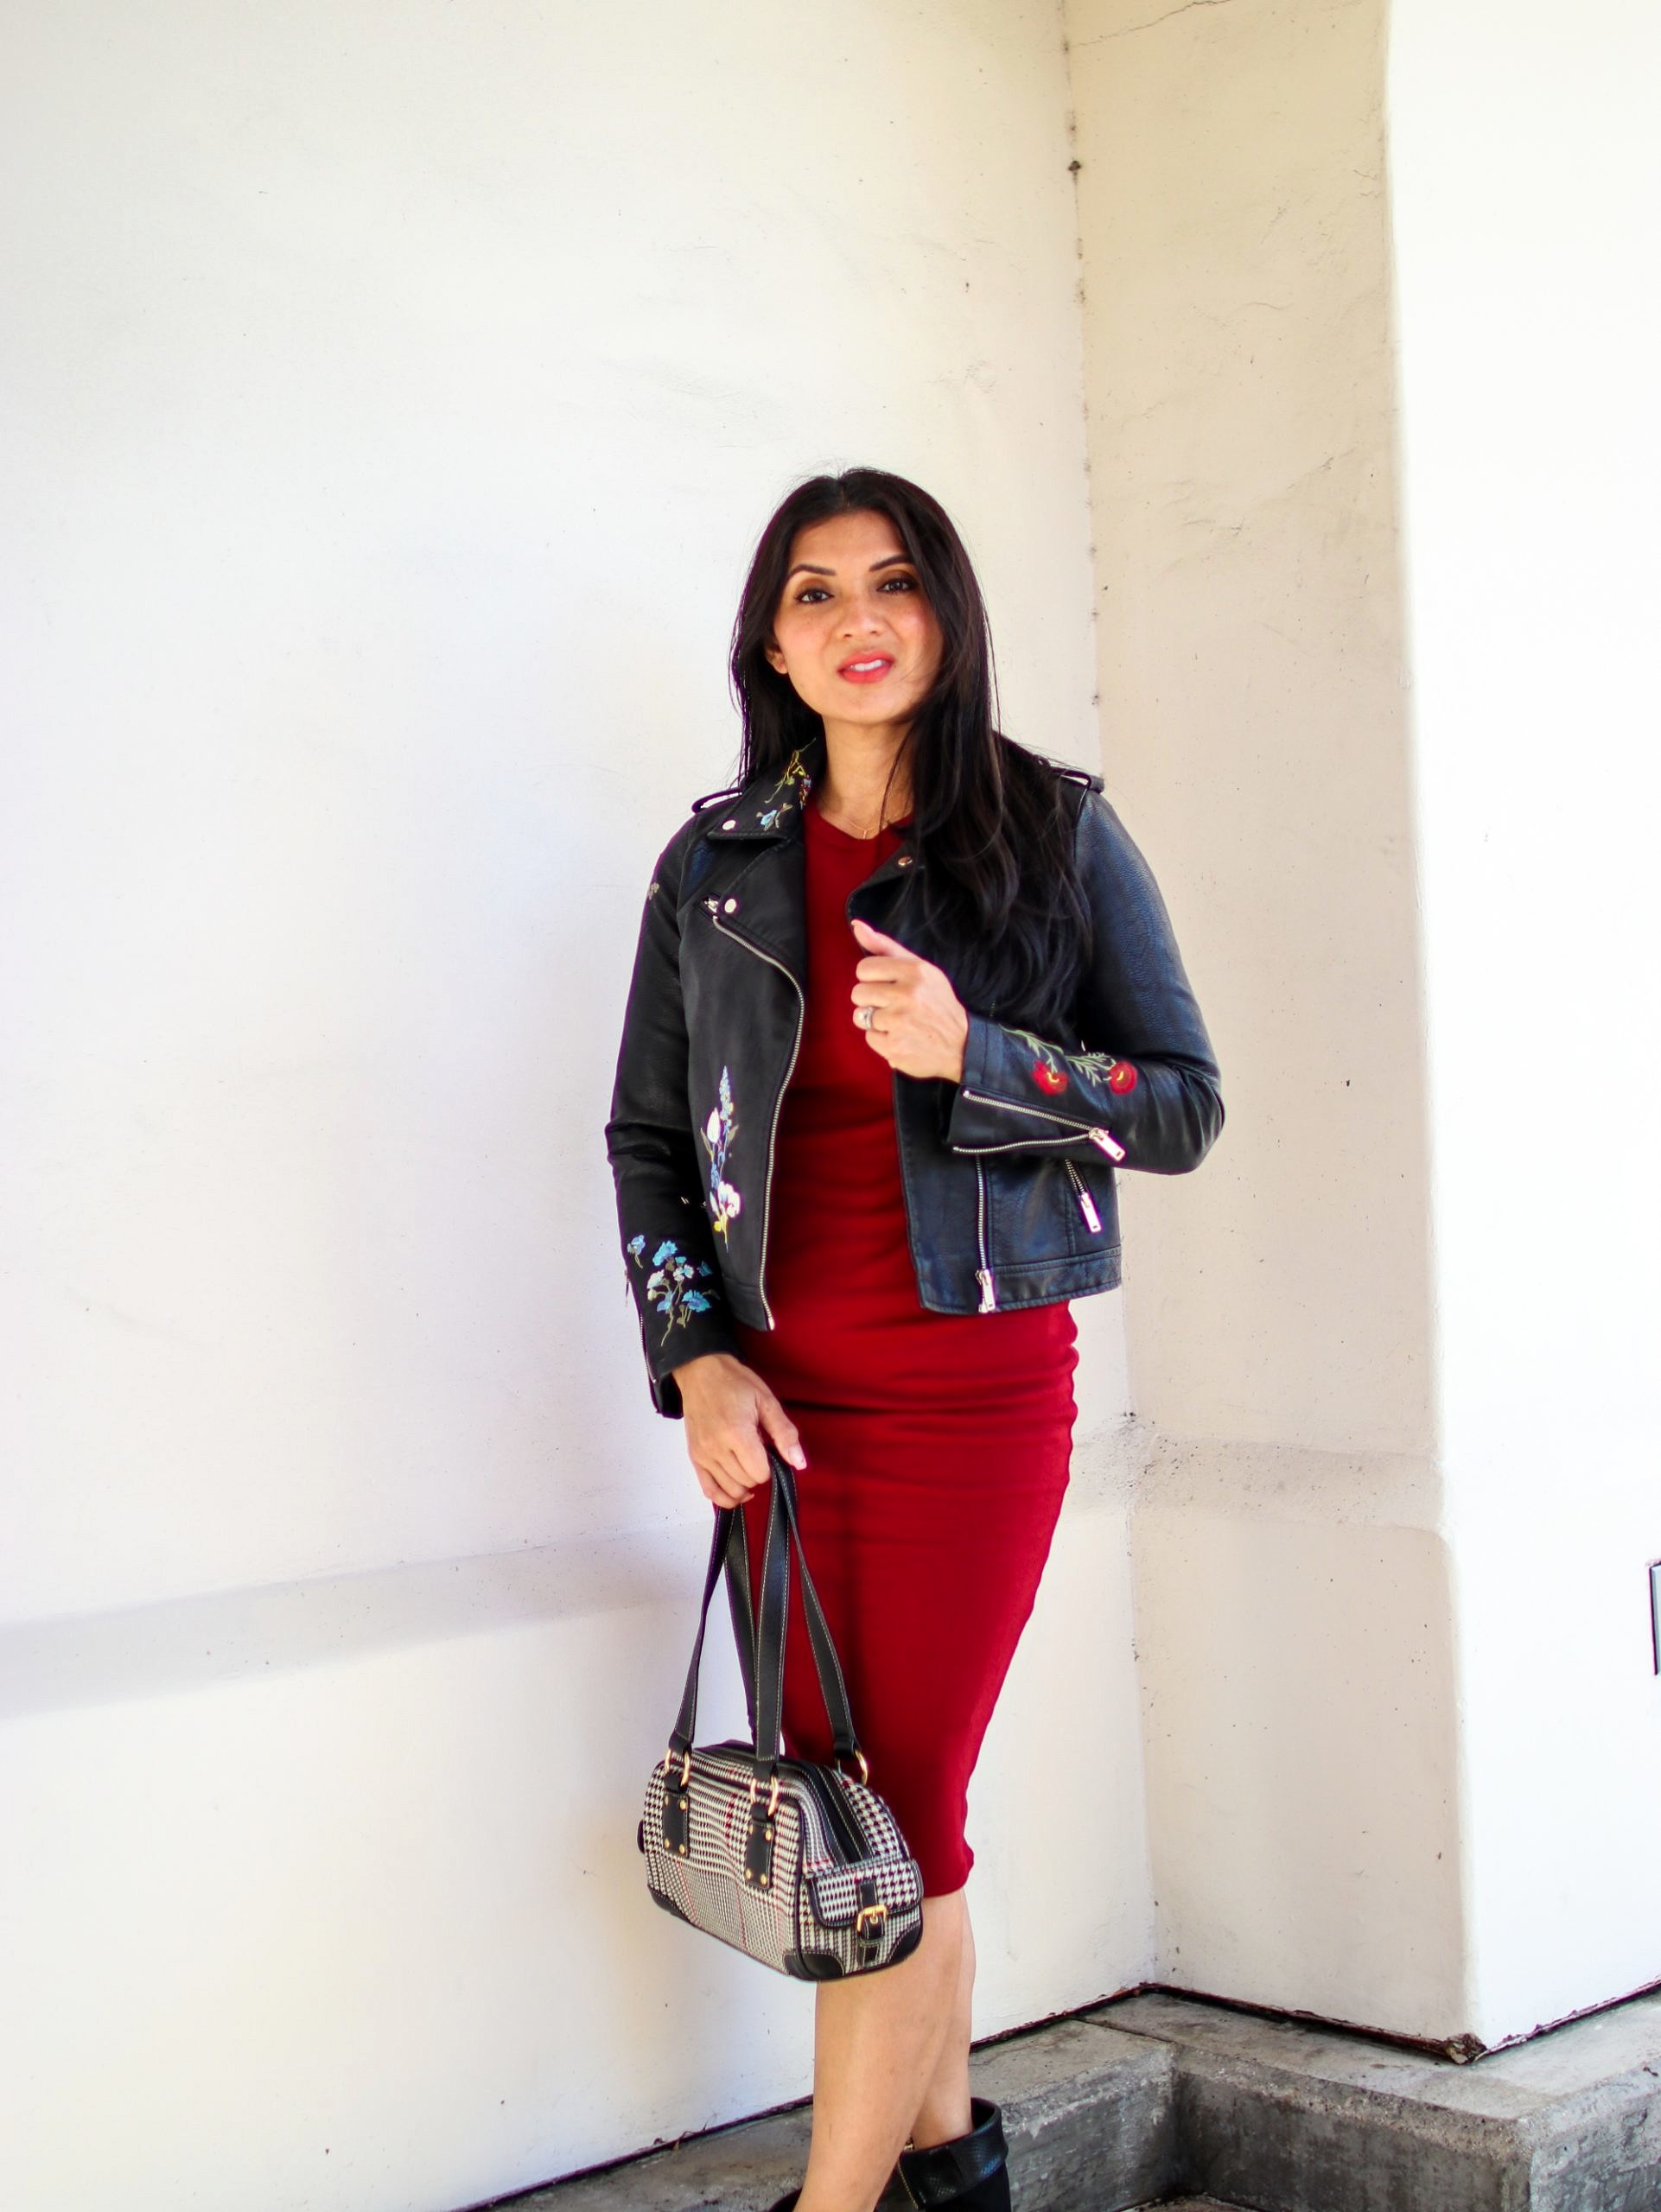 Looking for the perfect Moto jacket to add to your wardrobe? Orange County Blogger Debbie Savage is sharing her favorite Moto jackets that you need to incorporate into your wardrobe ASAP. Click to see them HERE!